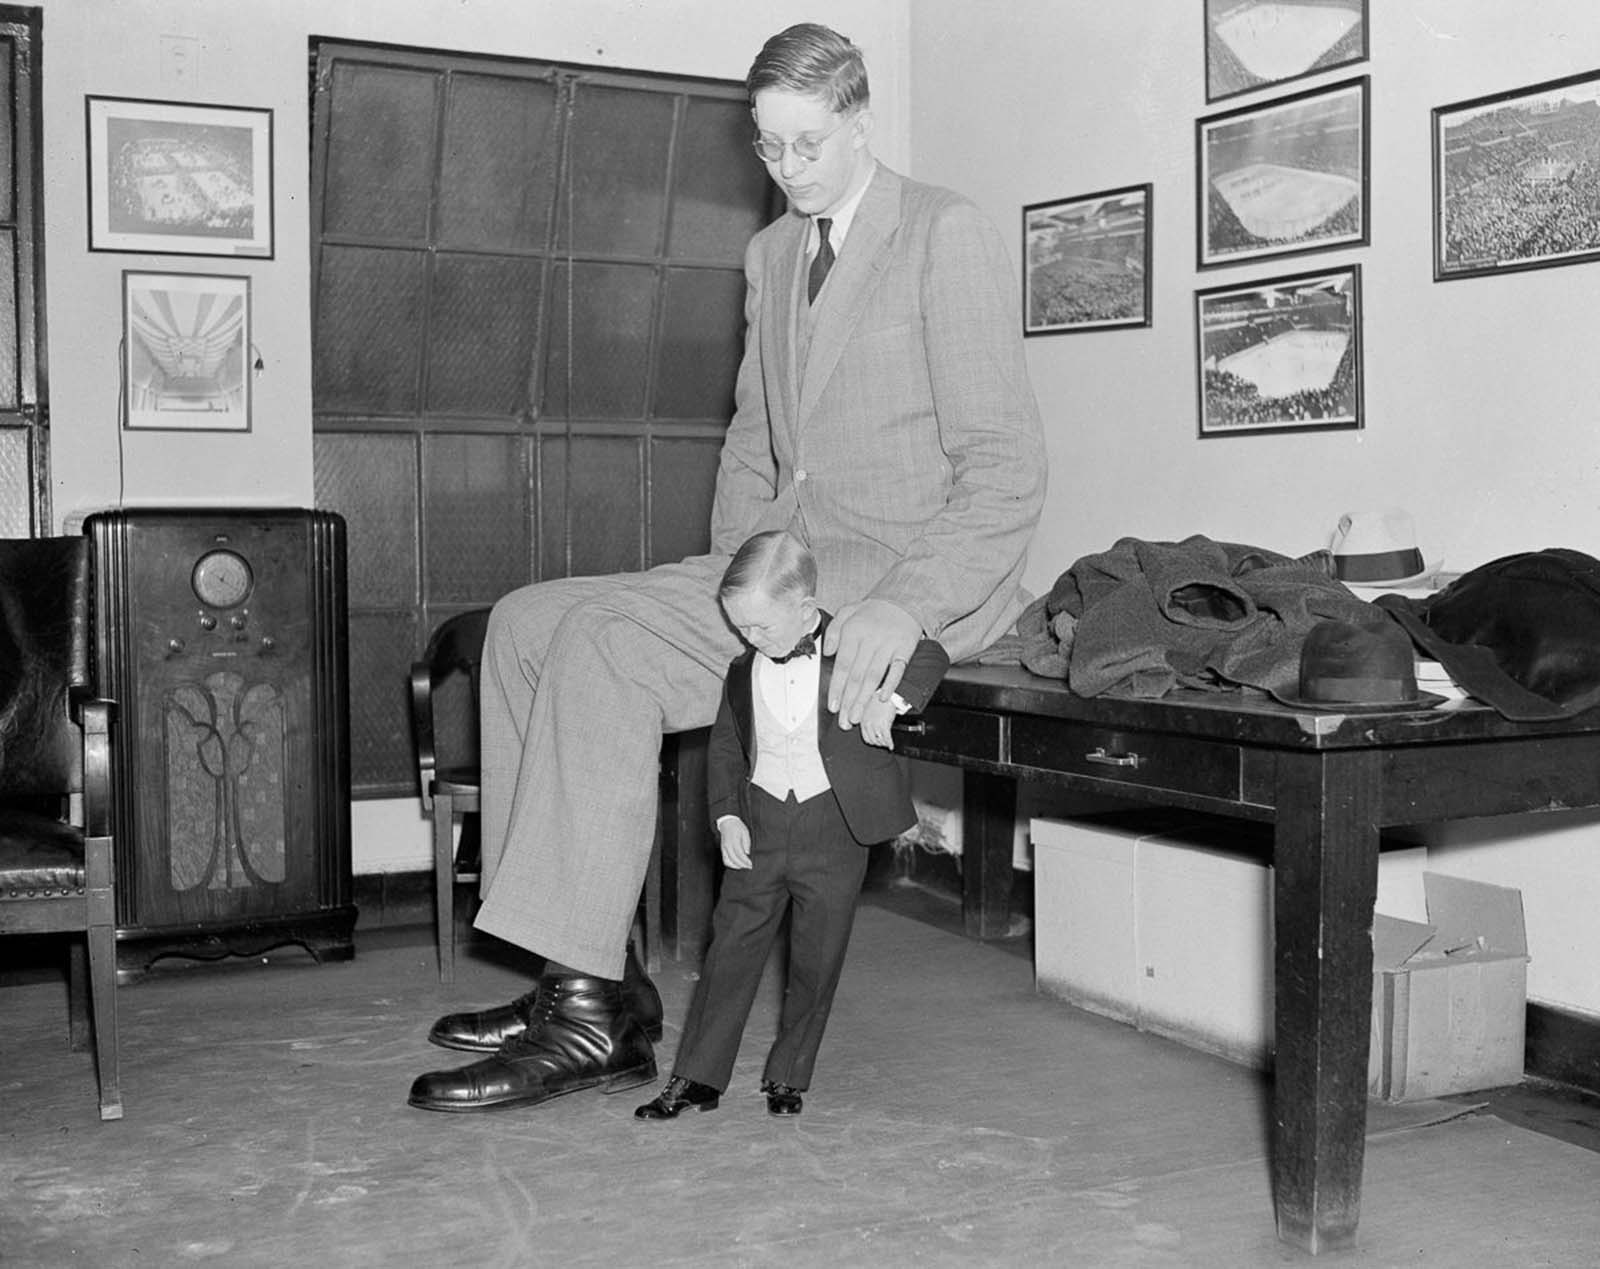 “Major Mite” compares his size 4 shoes with Wadlow’s size 36, 1937.